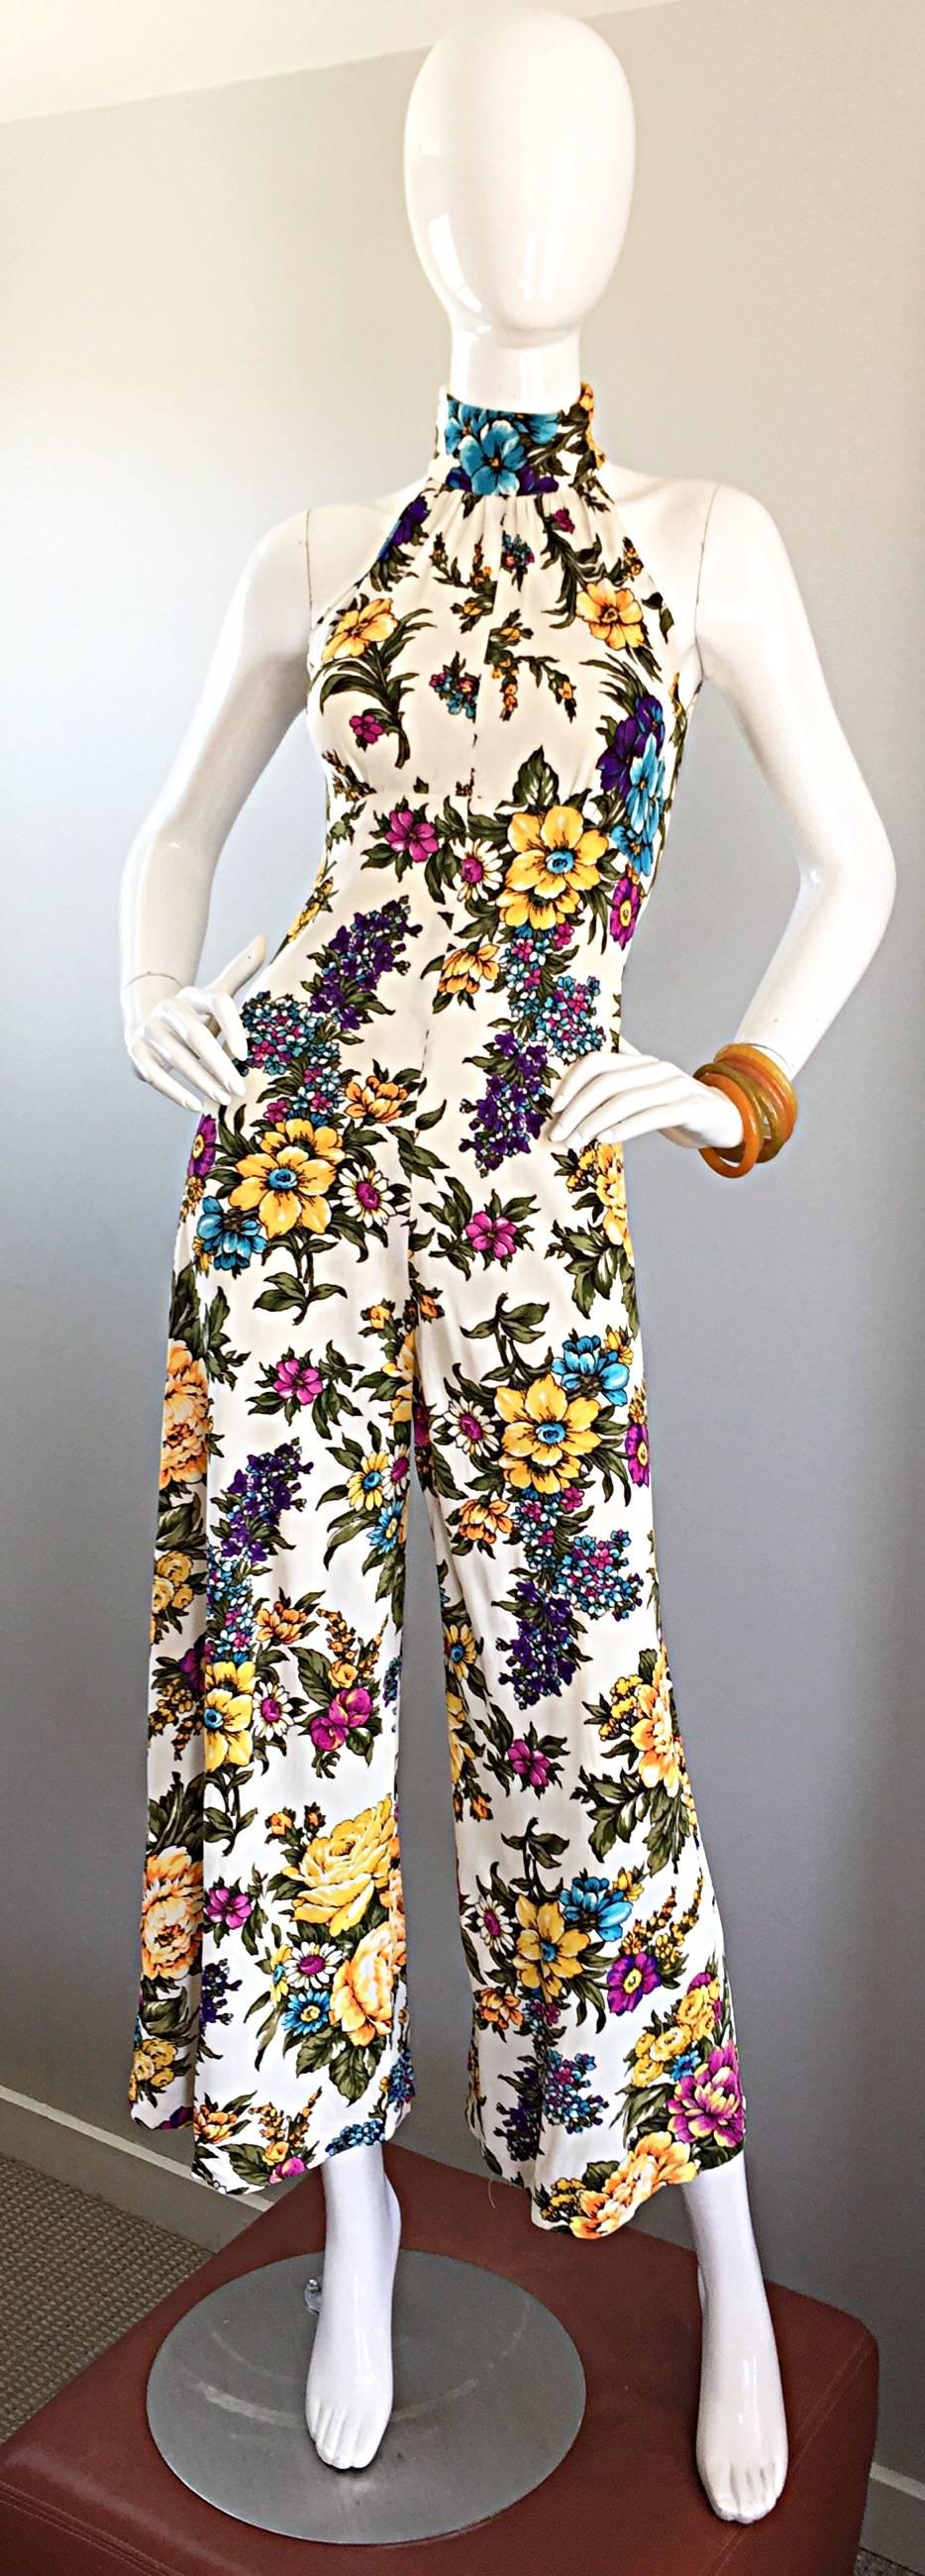 Incredible 1970s cropped wide leg bell bottom halter jumpsuit! Features a white background, with pink, blue, yellow, purple and green flowers printed throughout. Flattering high neck, with a fitted bodice. Looks amazing on! Hidden zipper up the back